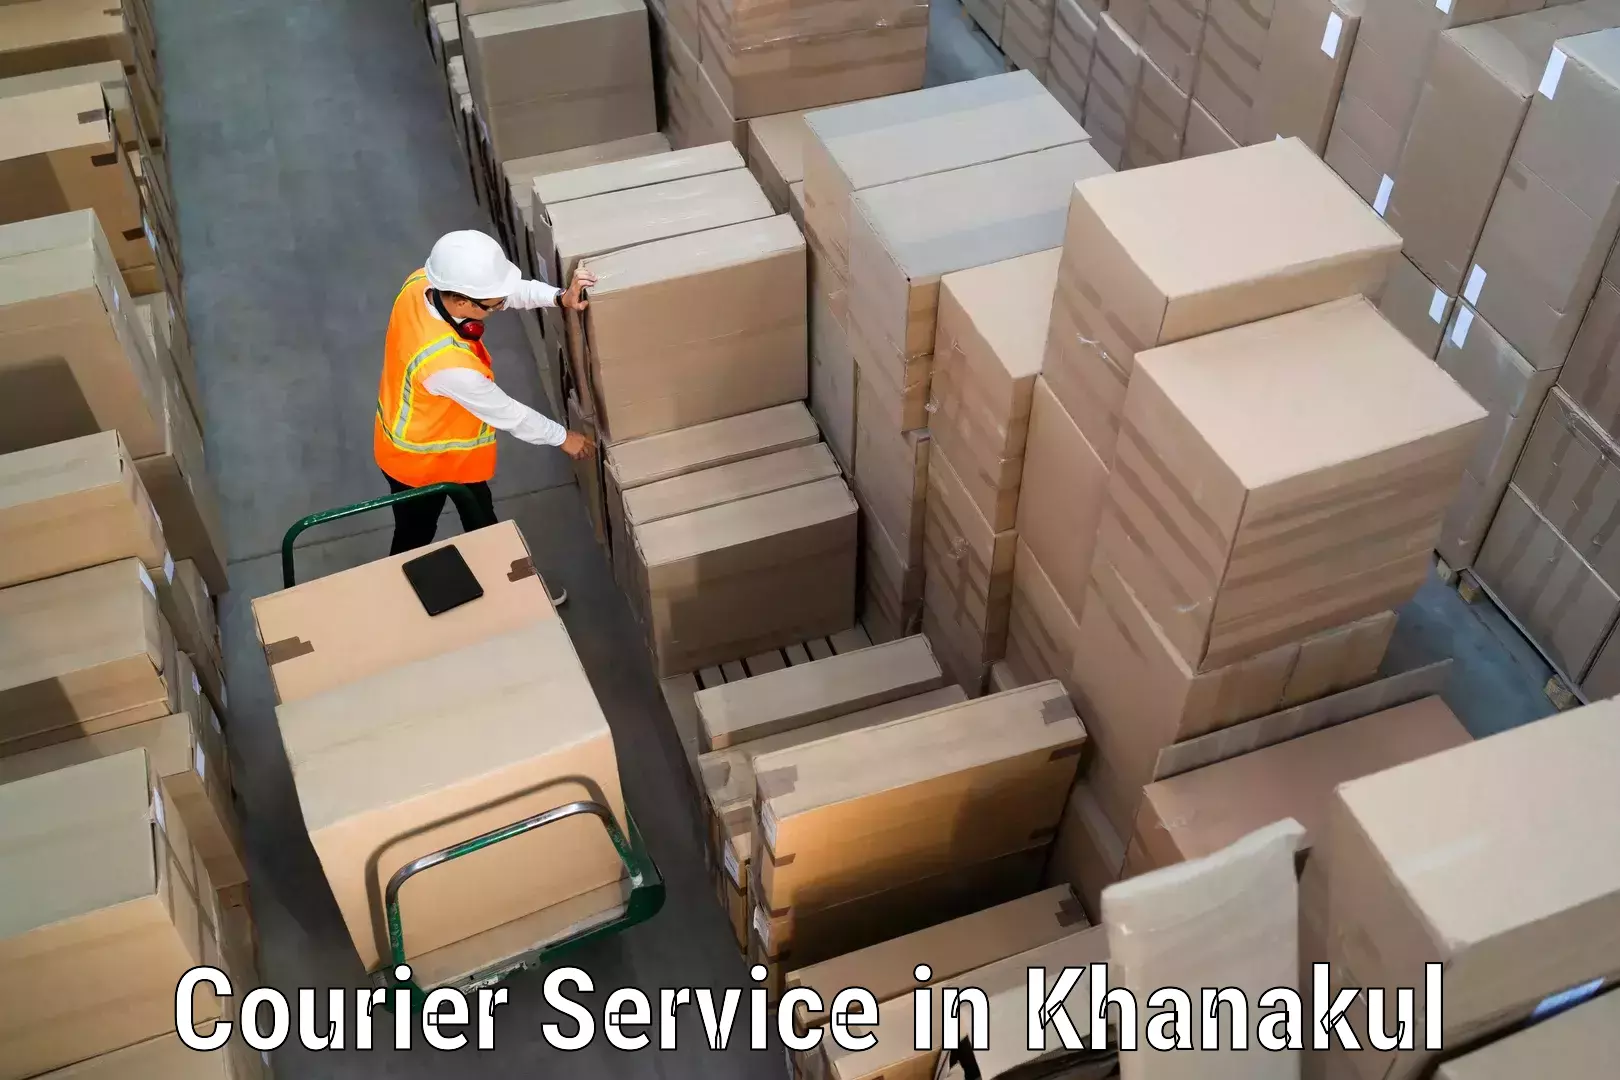 Dynamic courier operations in Khanakul